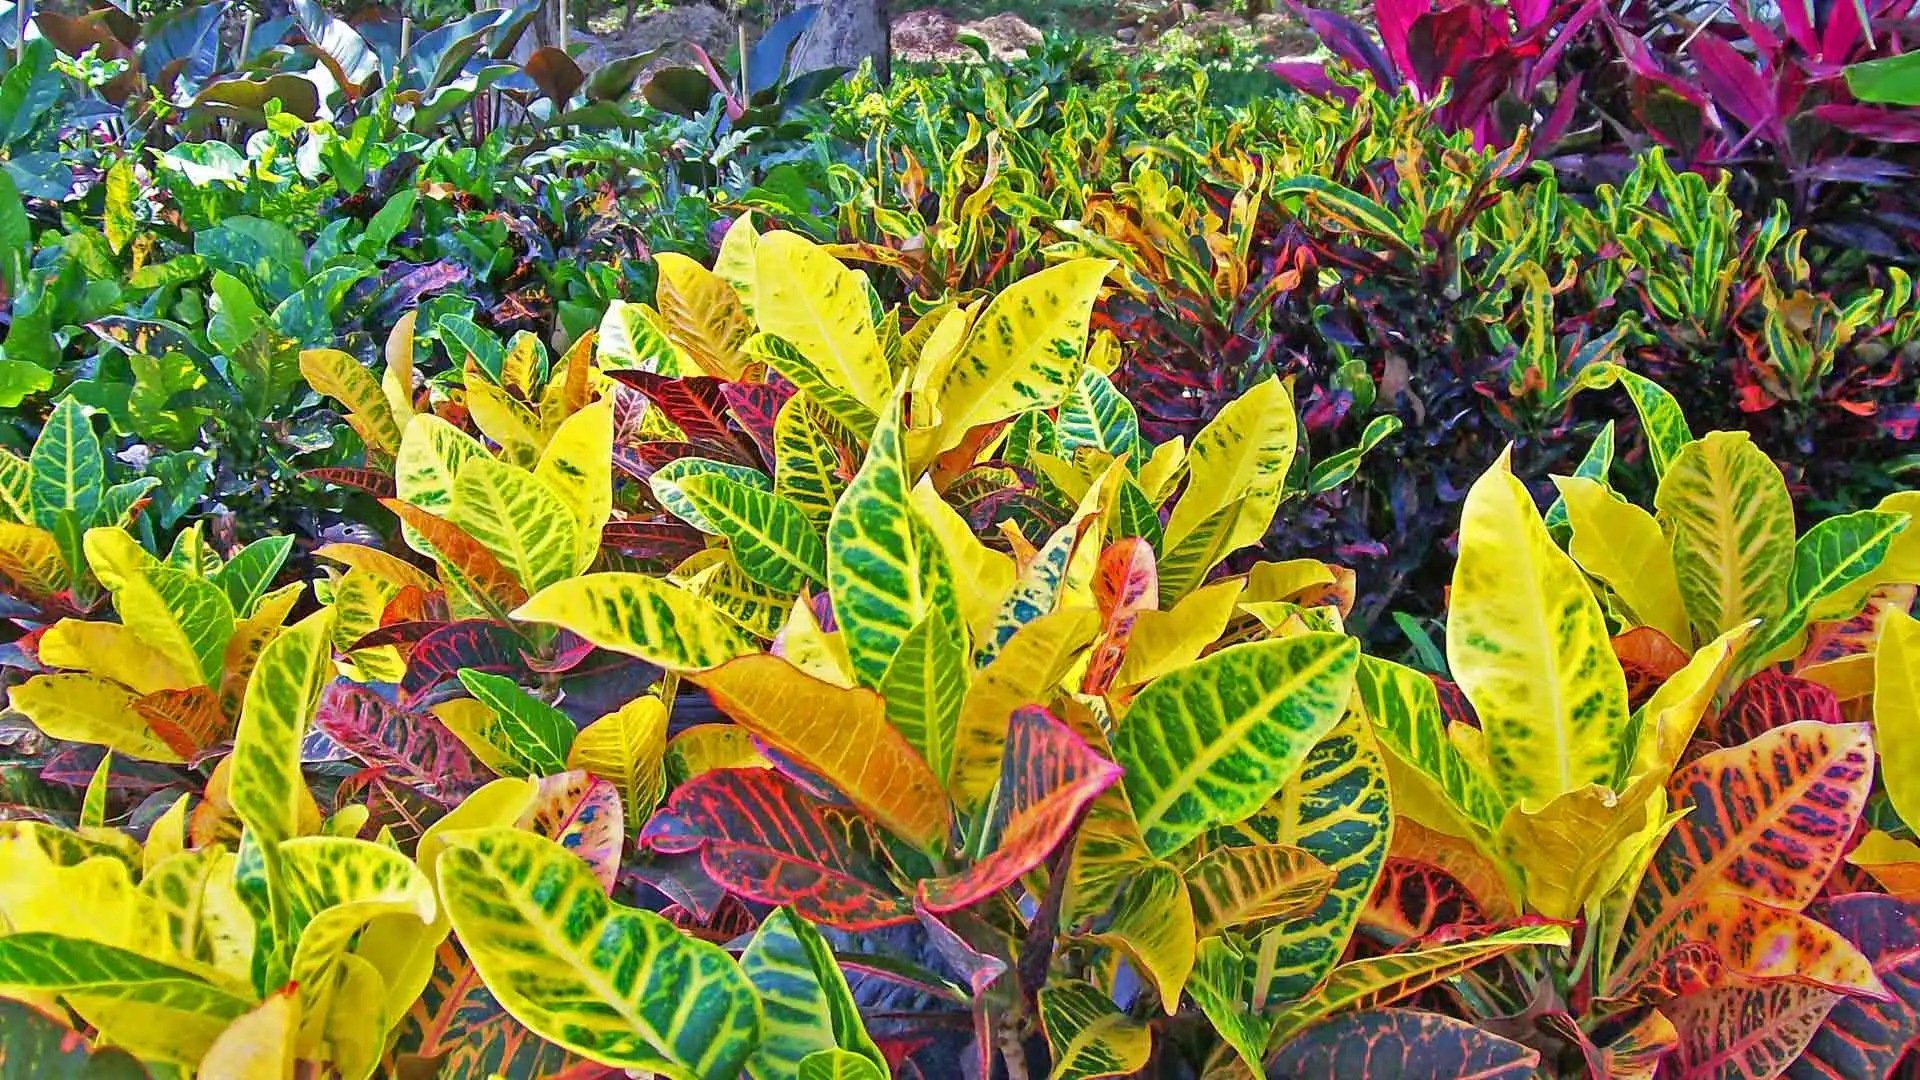 Background of Crotons for photo gallery.